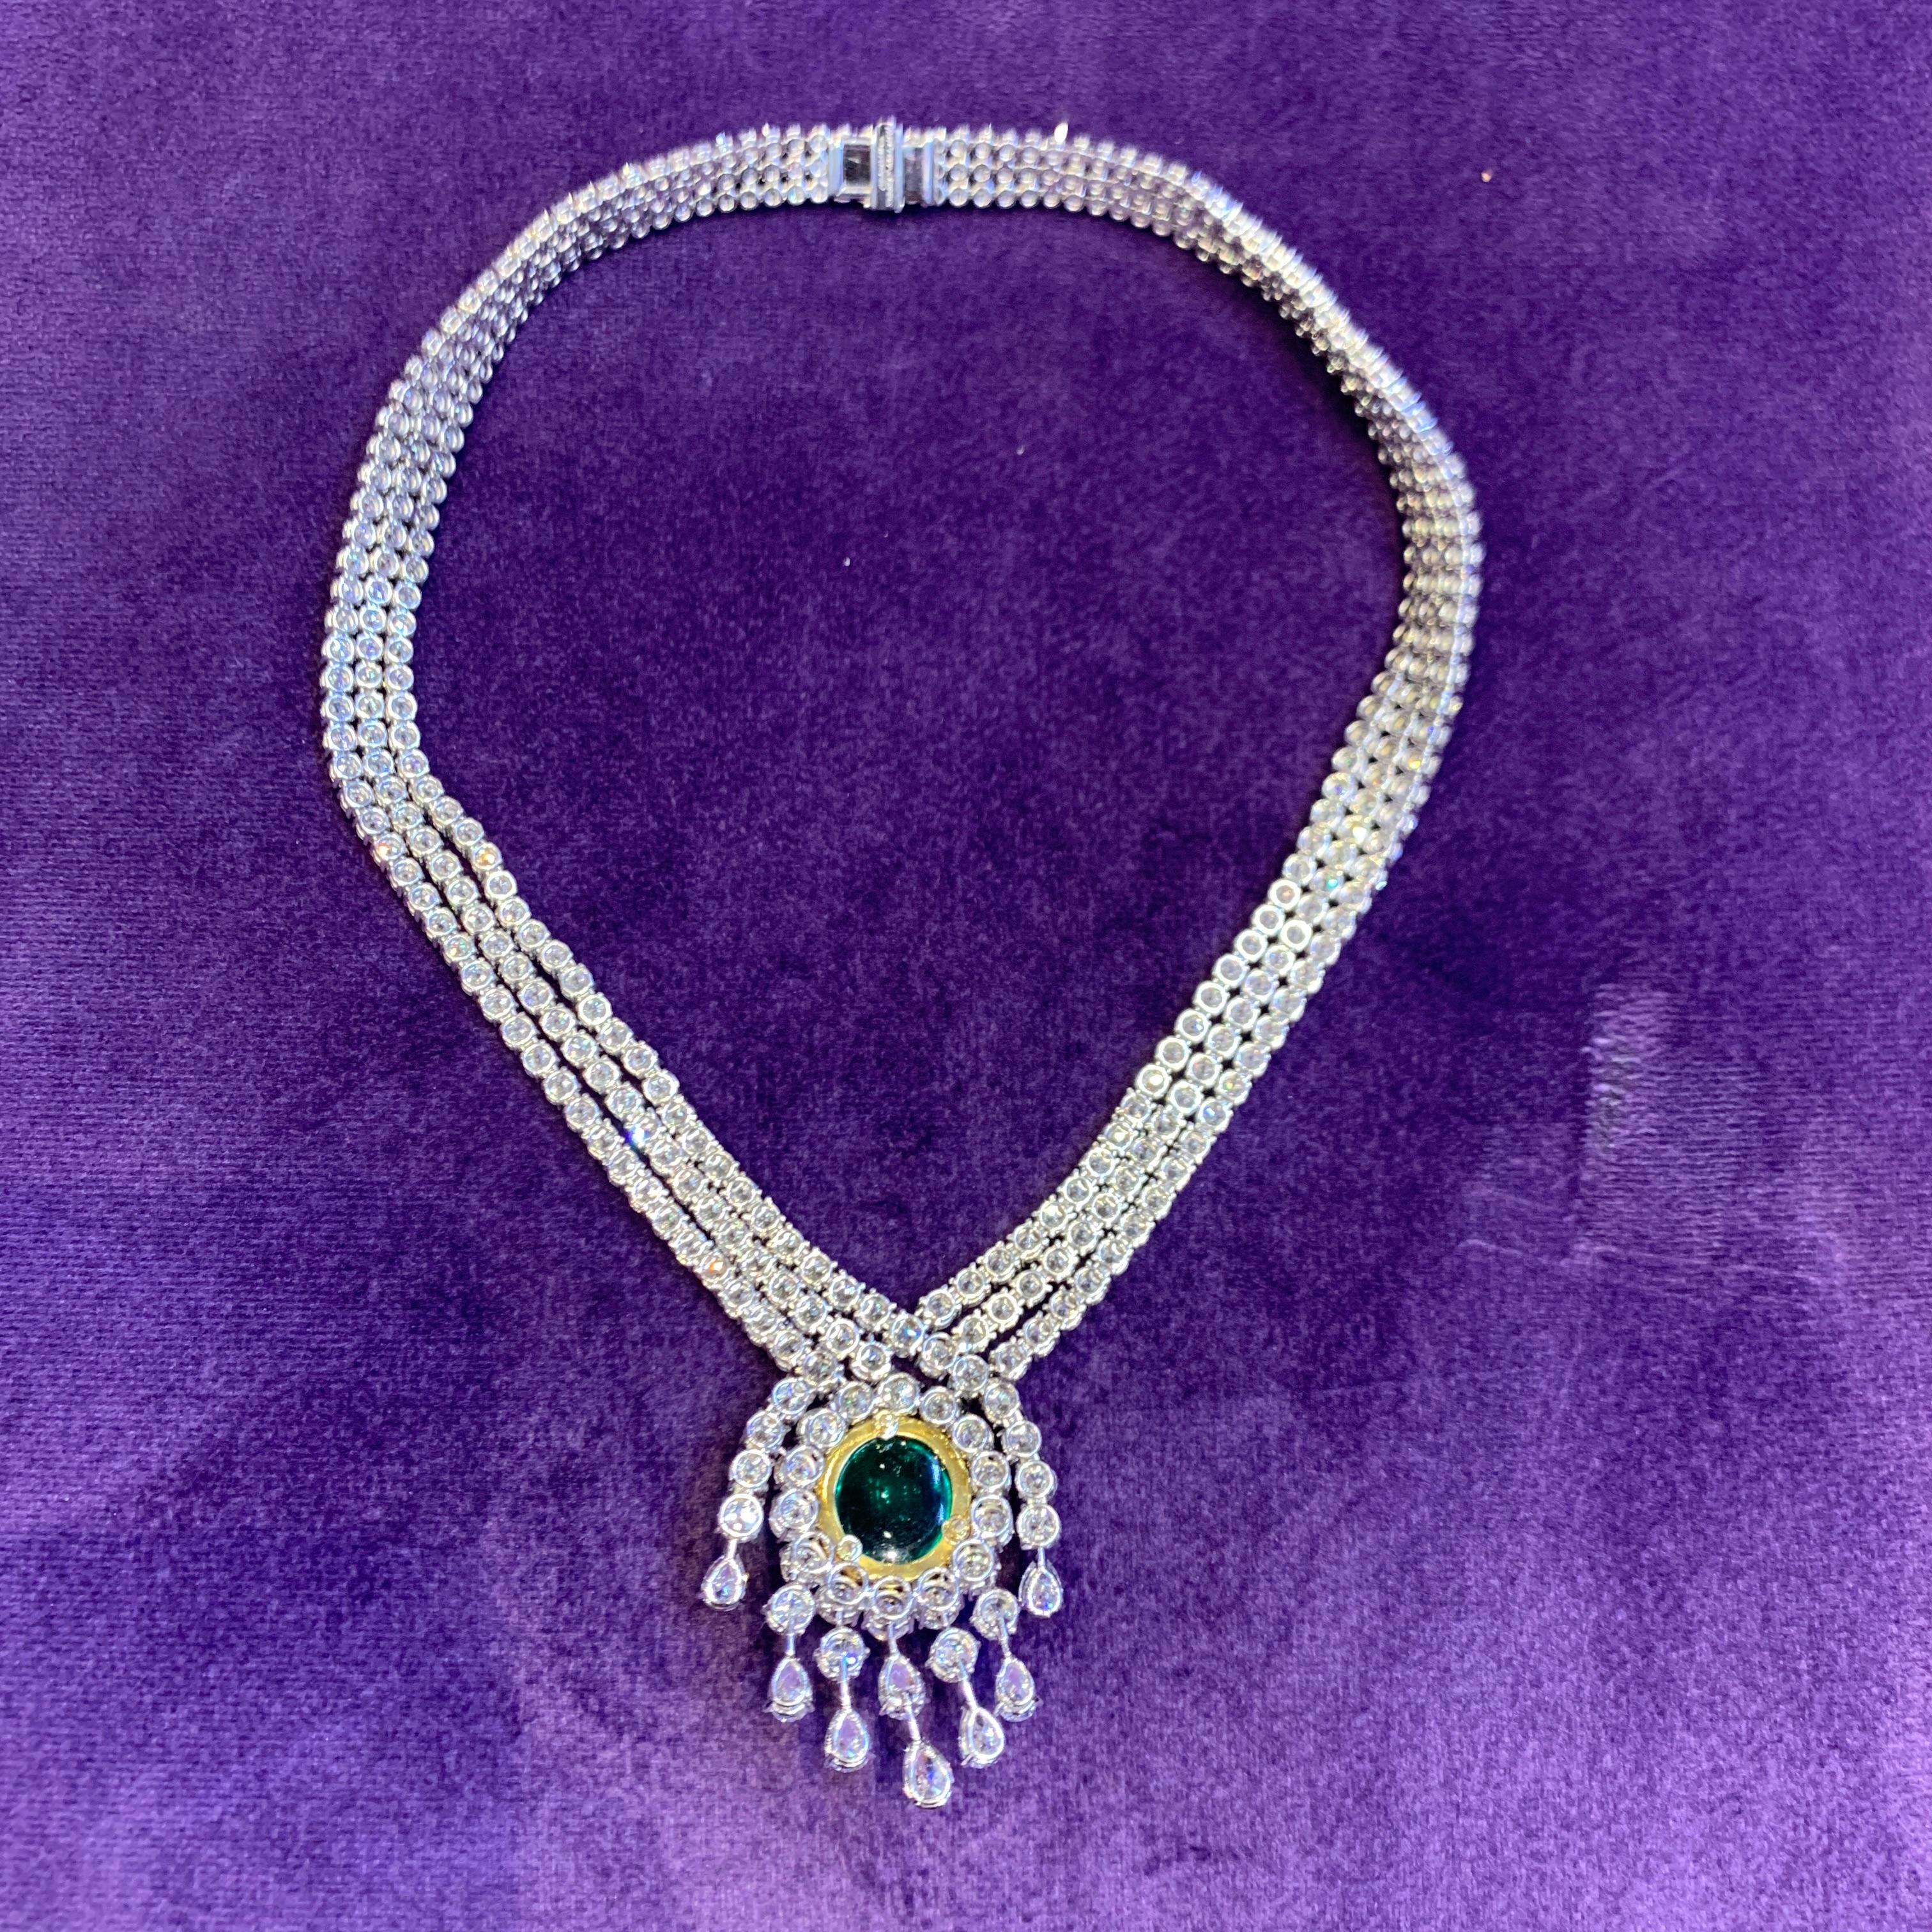 Important Van Cleef & Arpels Diamond & Emerald Necklace In Excellent Condition For Sale In New York, NY